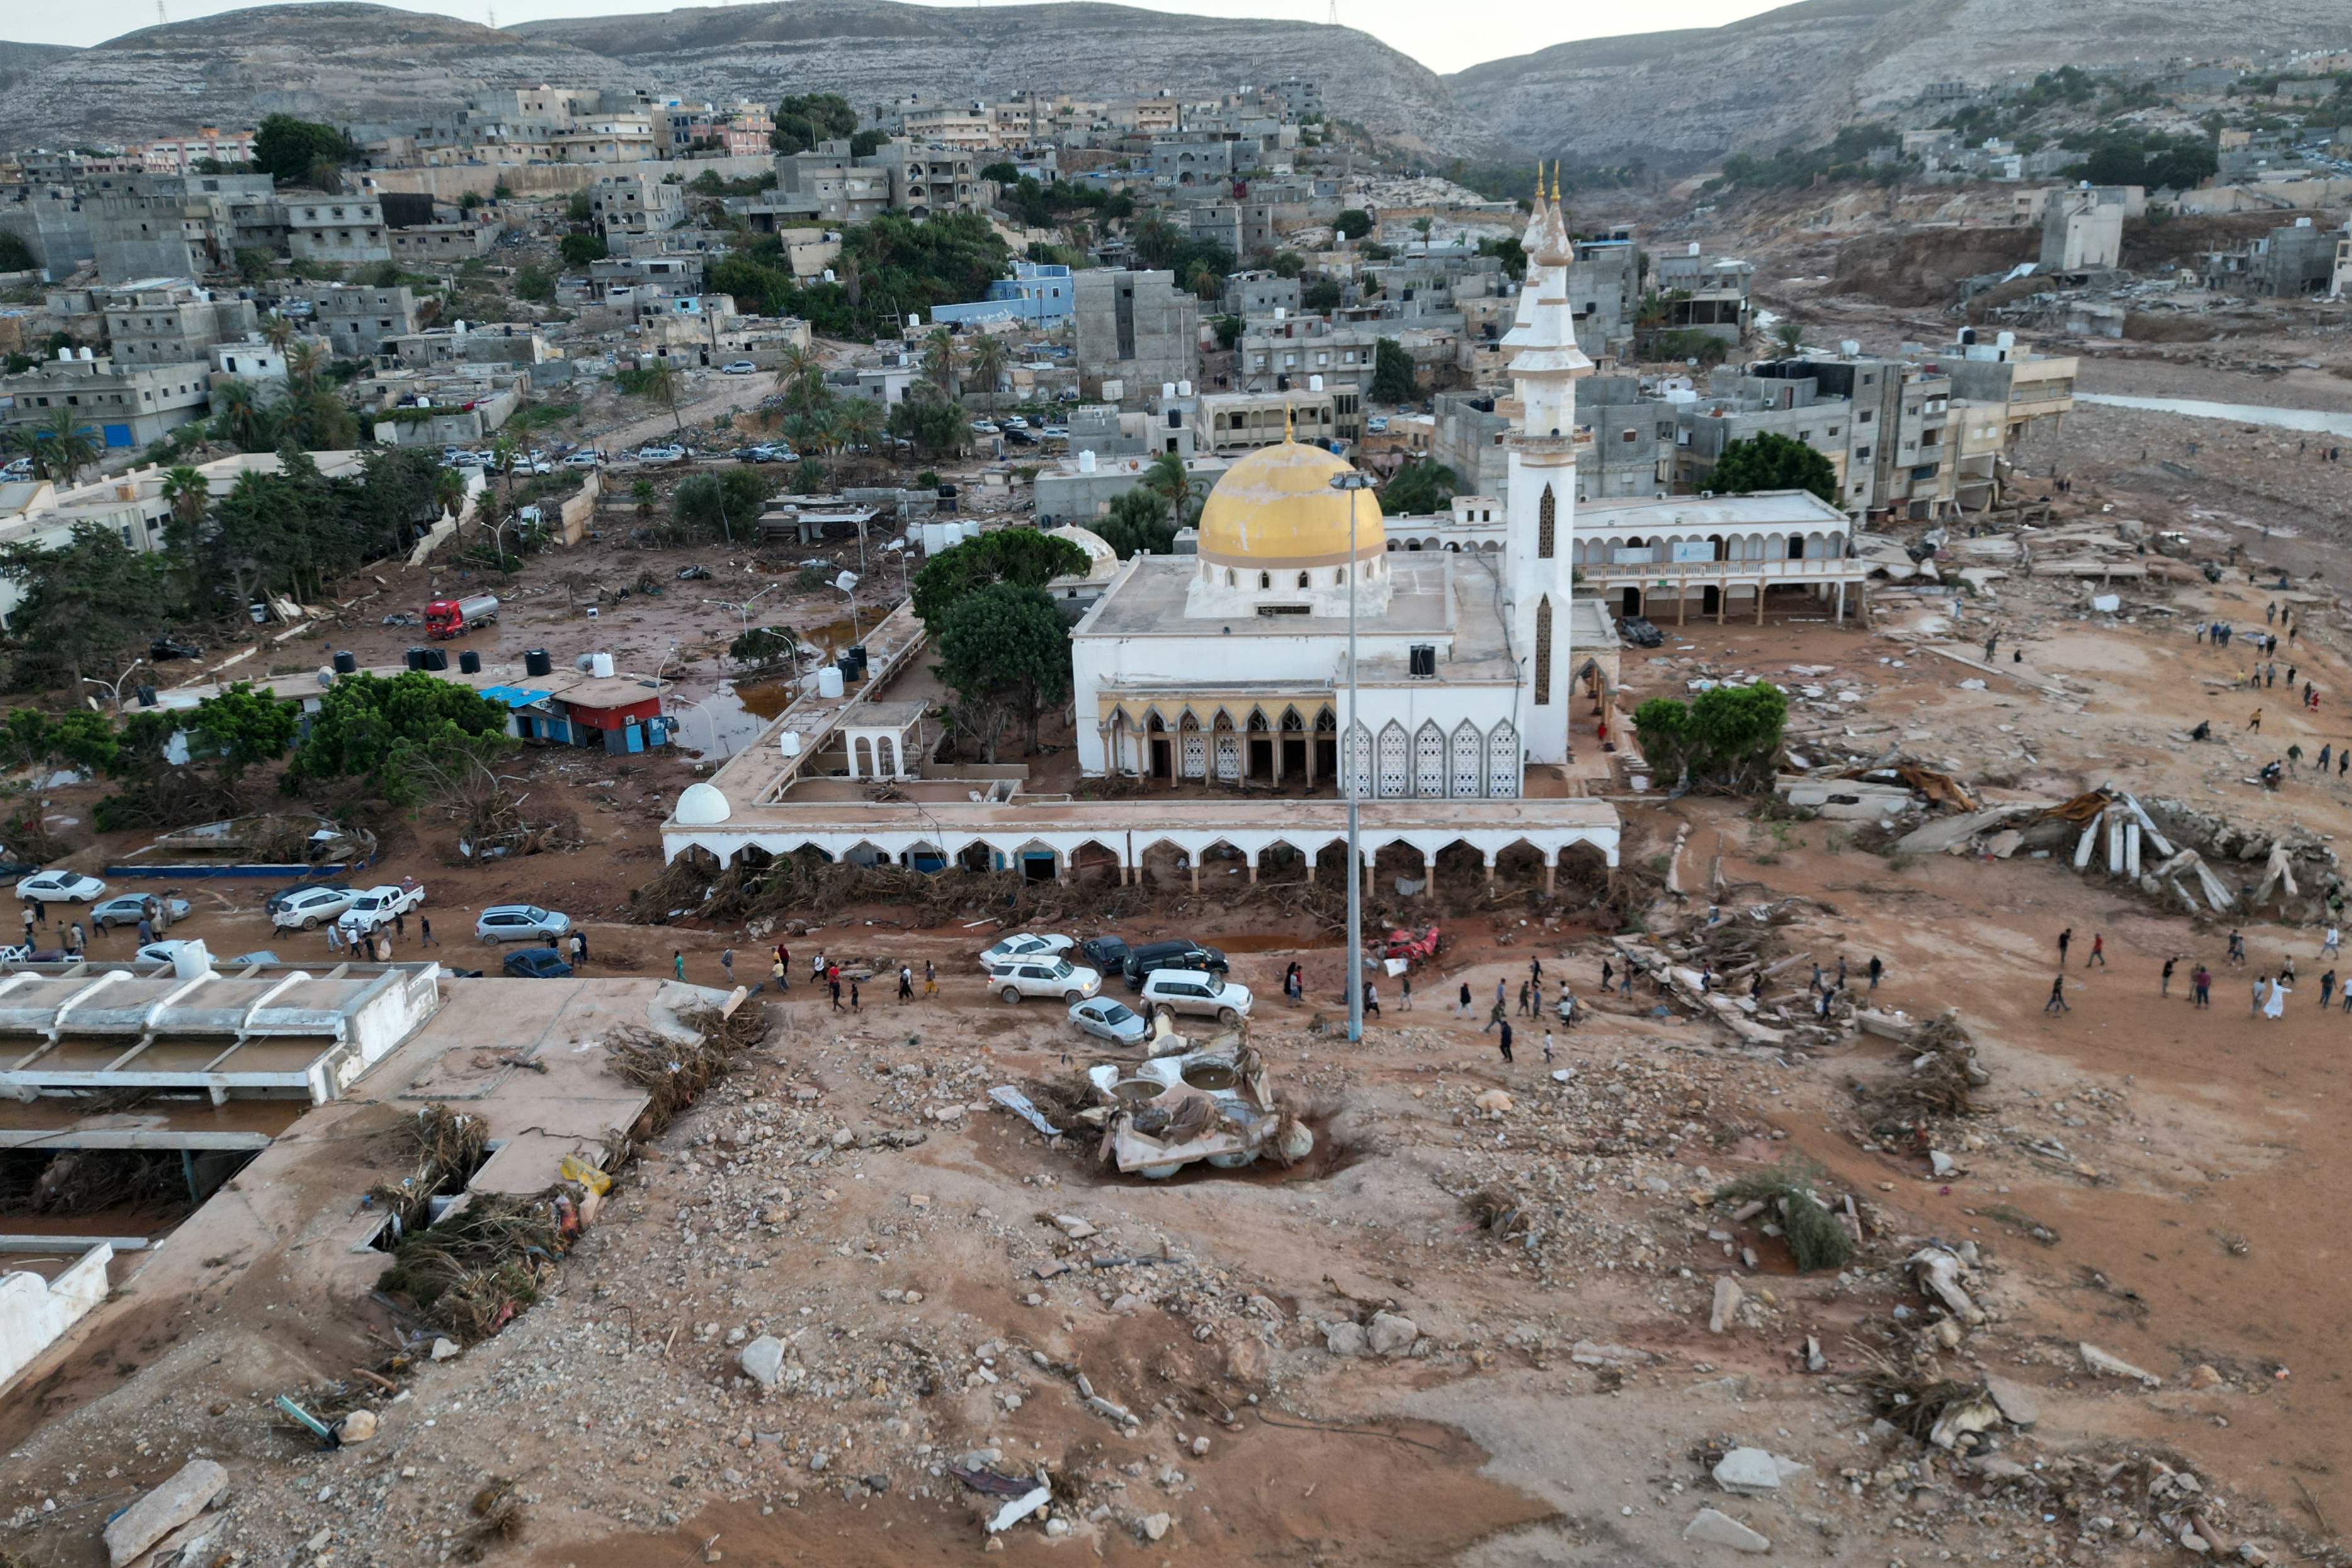 An aerial view shows the destruction caused by flash floods in Derna